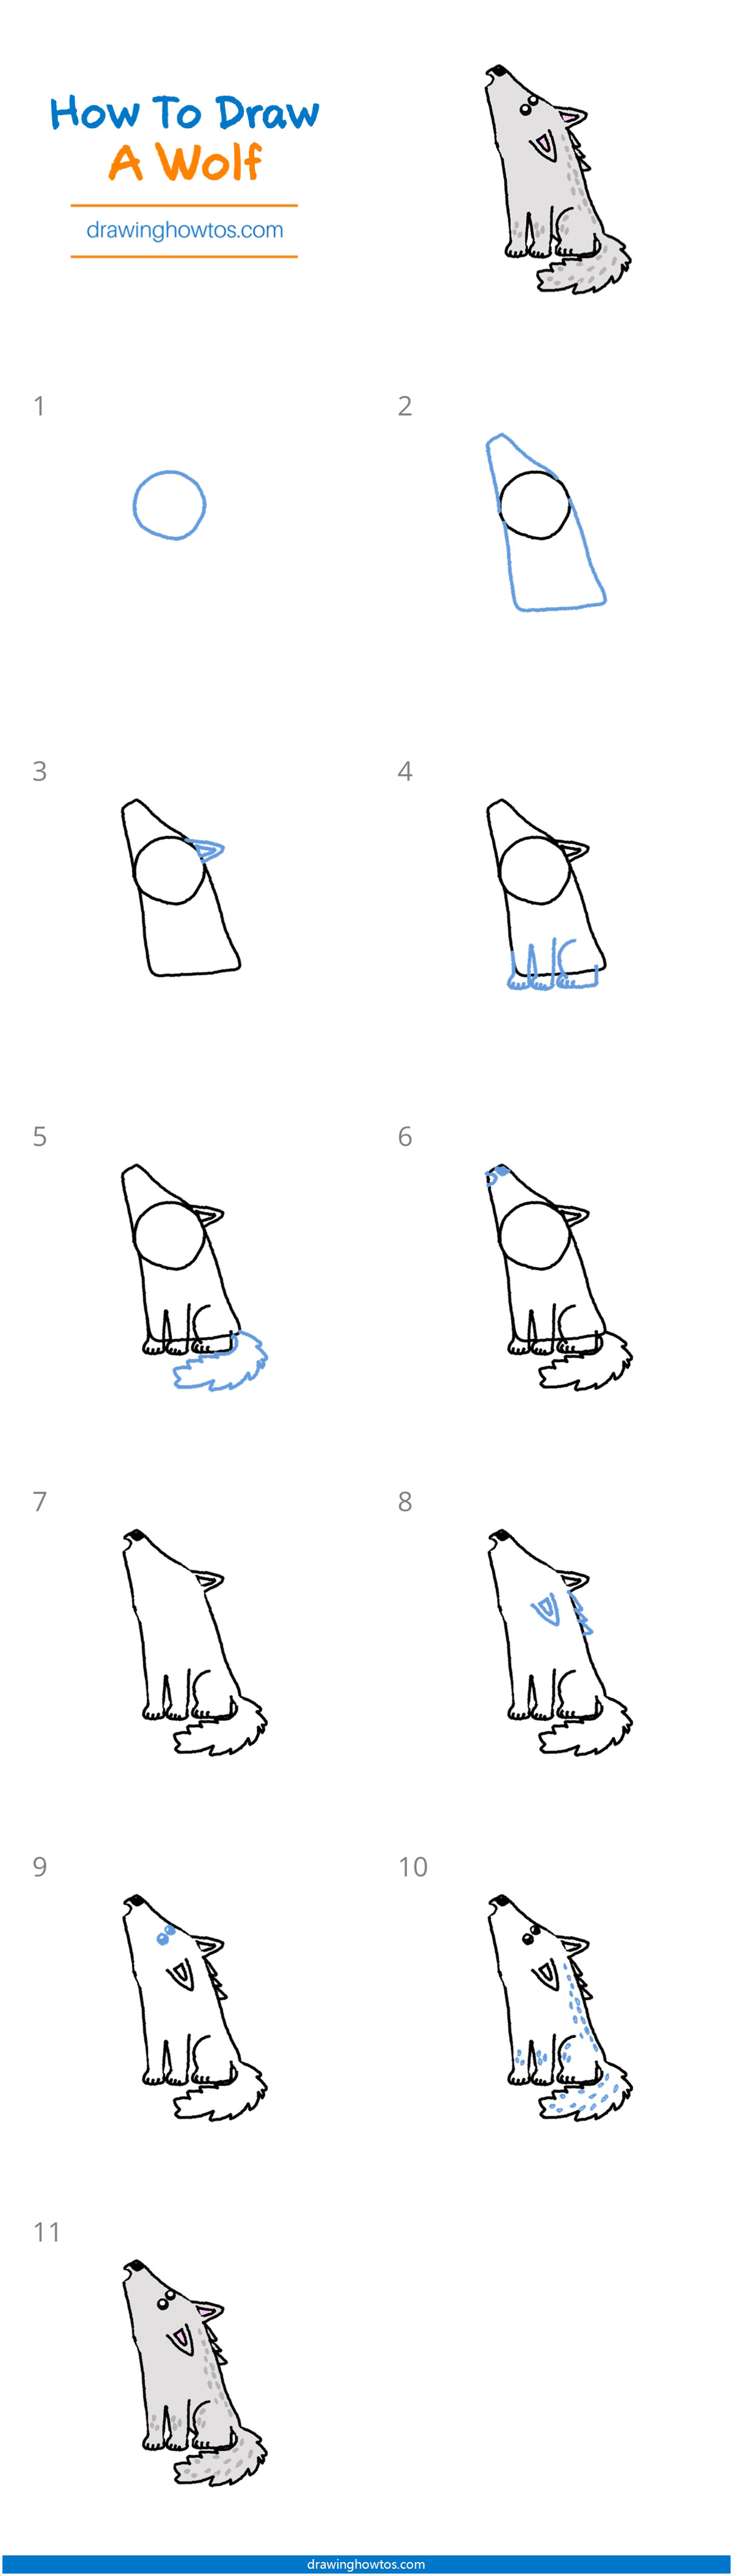 How To Draw A Step By Step Wolf